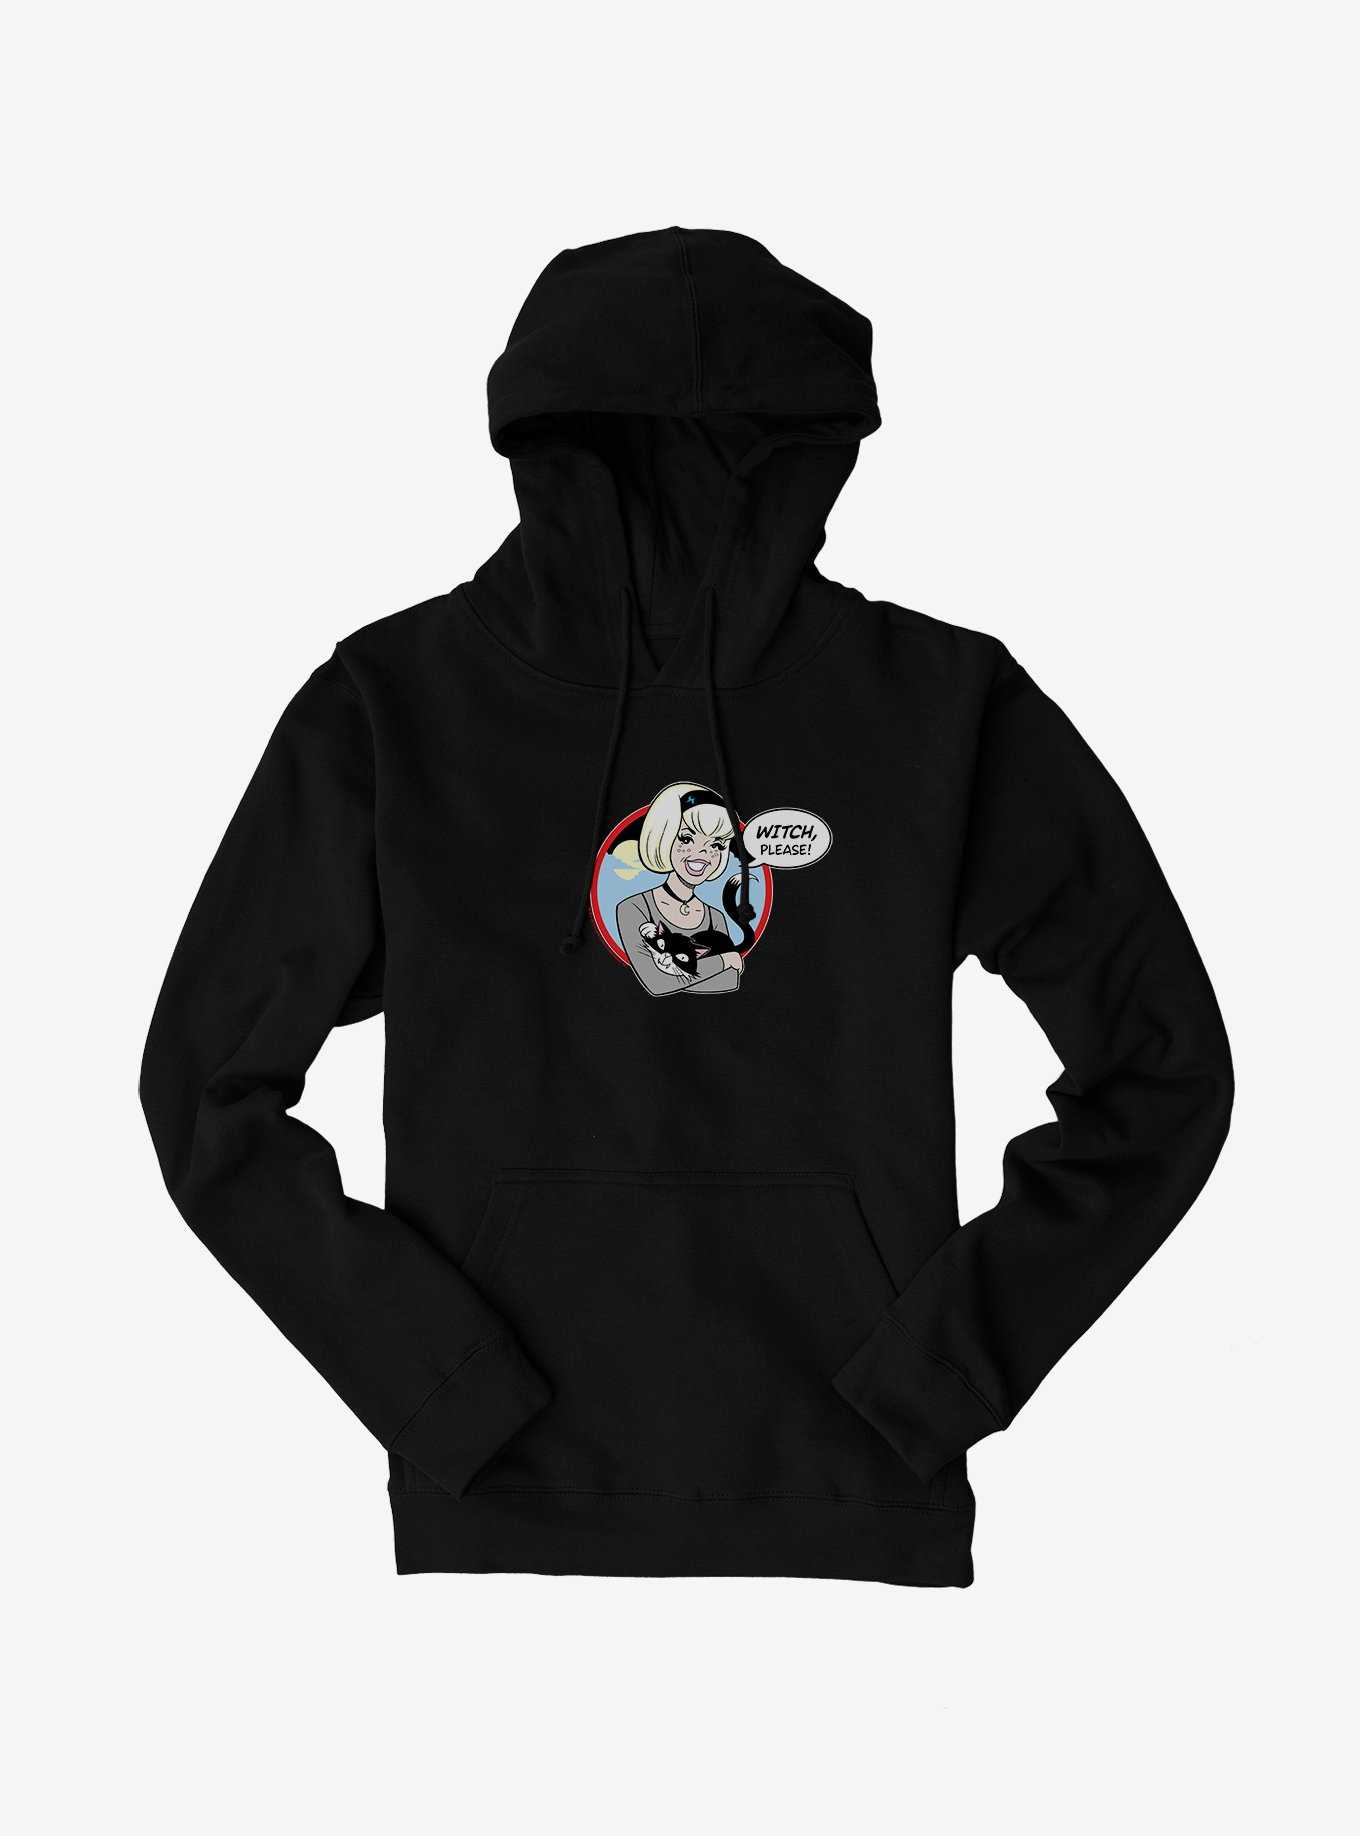 Archie Comics Chilling Adventures of Sabrina Witch Please Hoodie, , hi-res